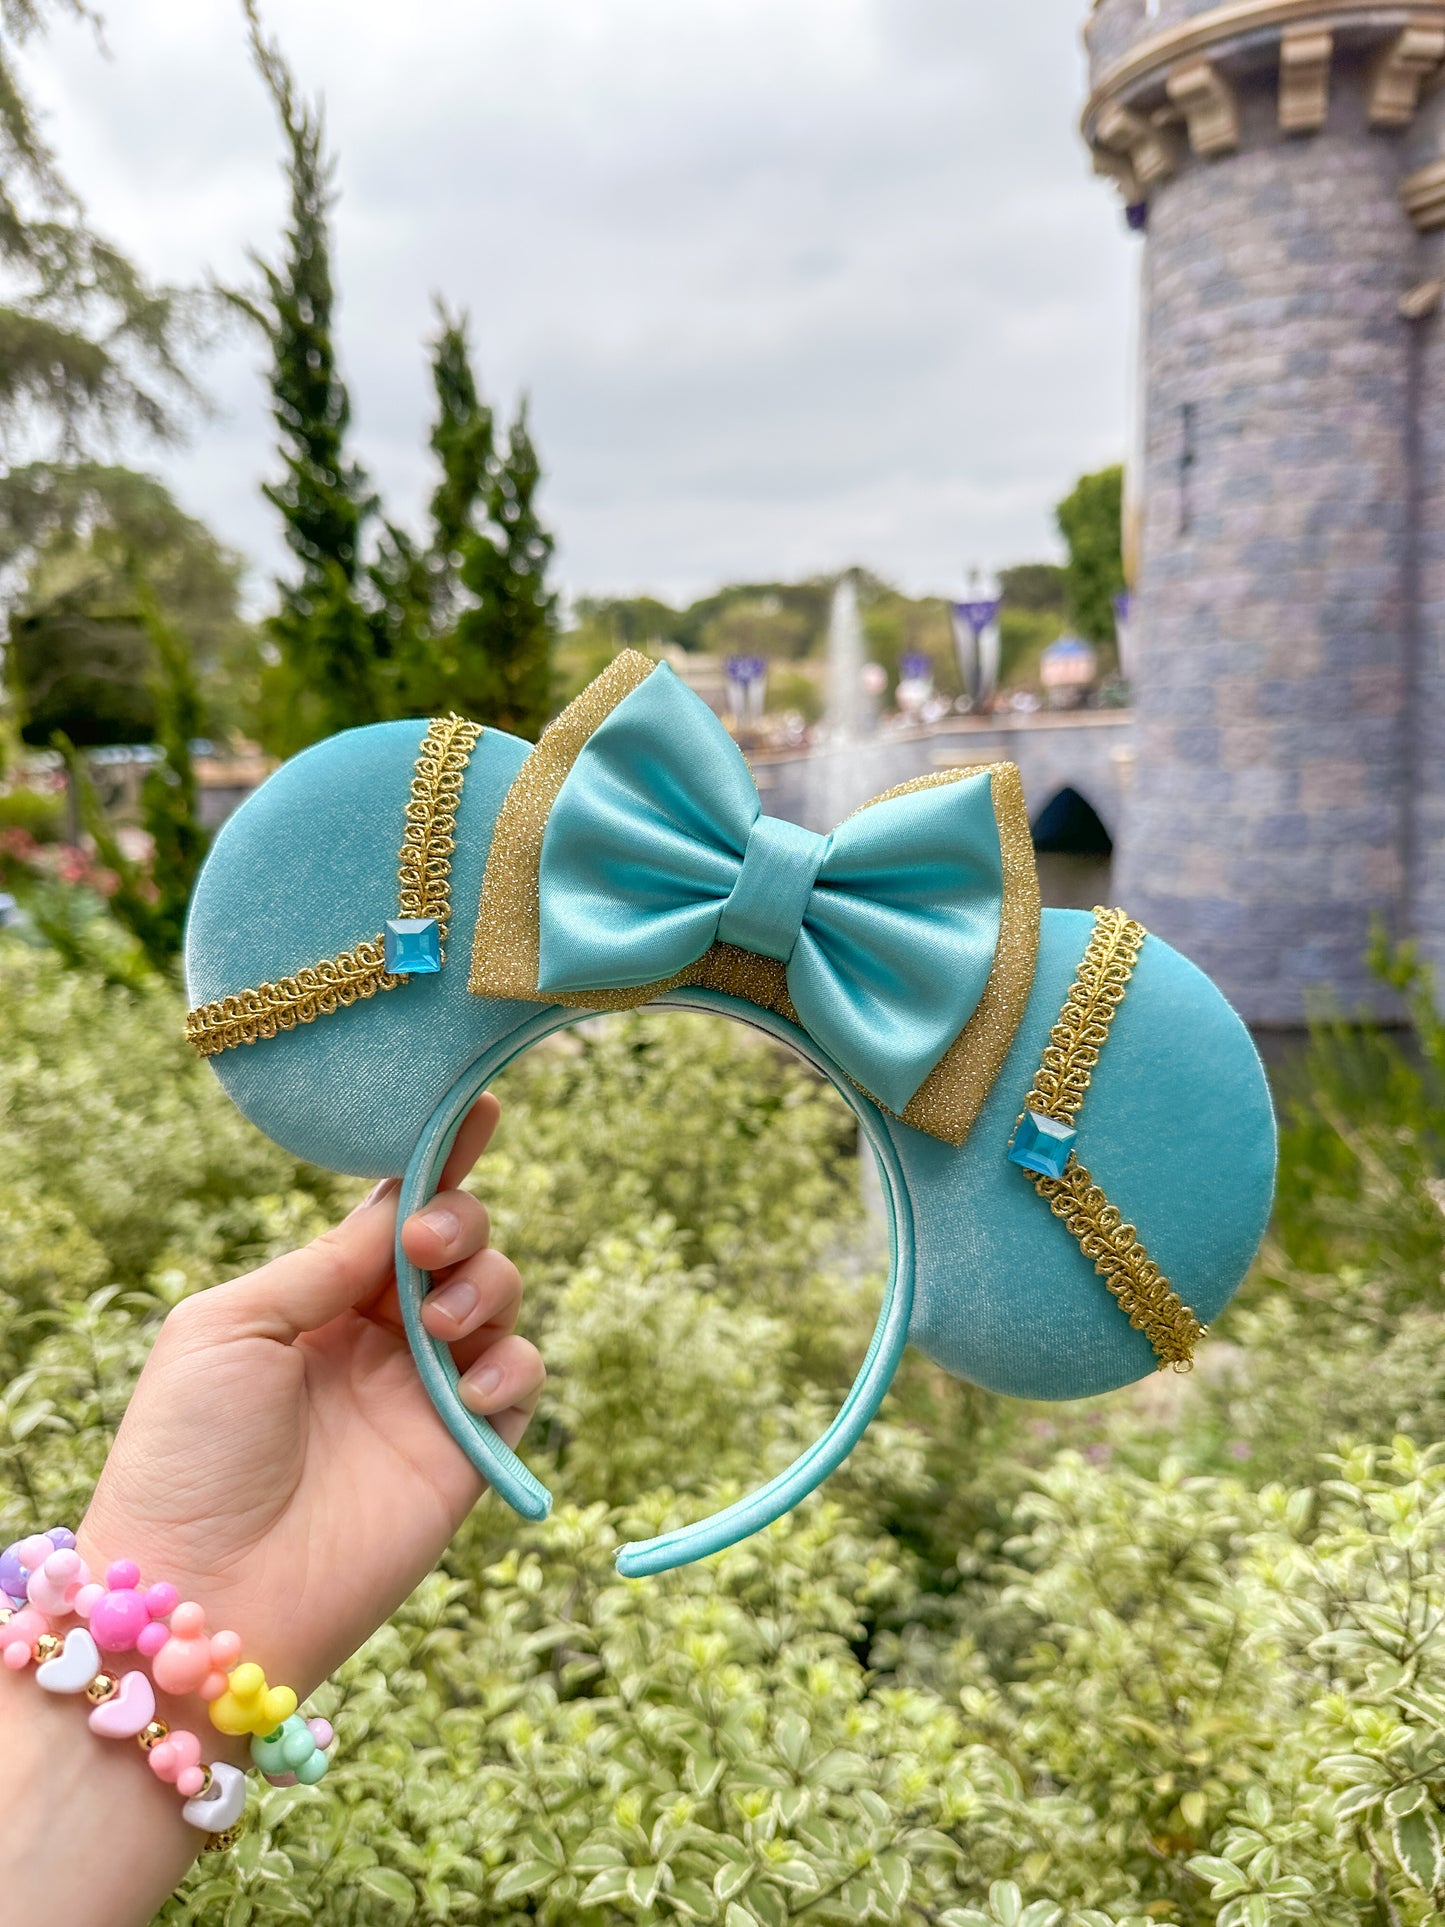 A Whole New World Mouse Ears!